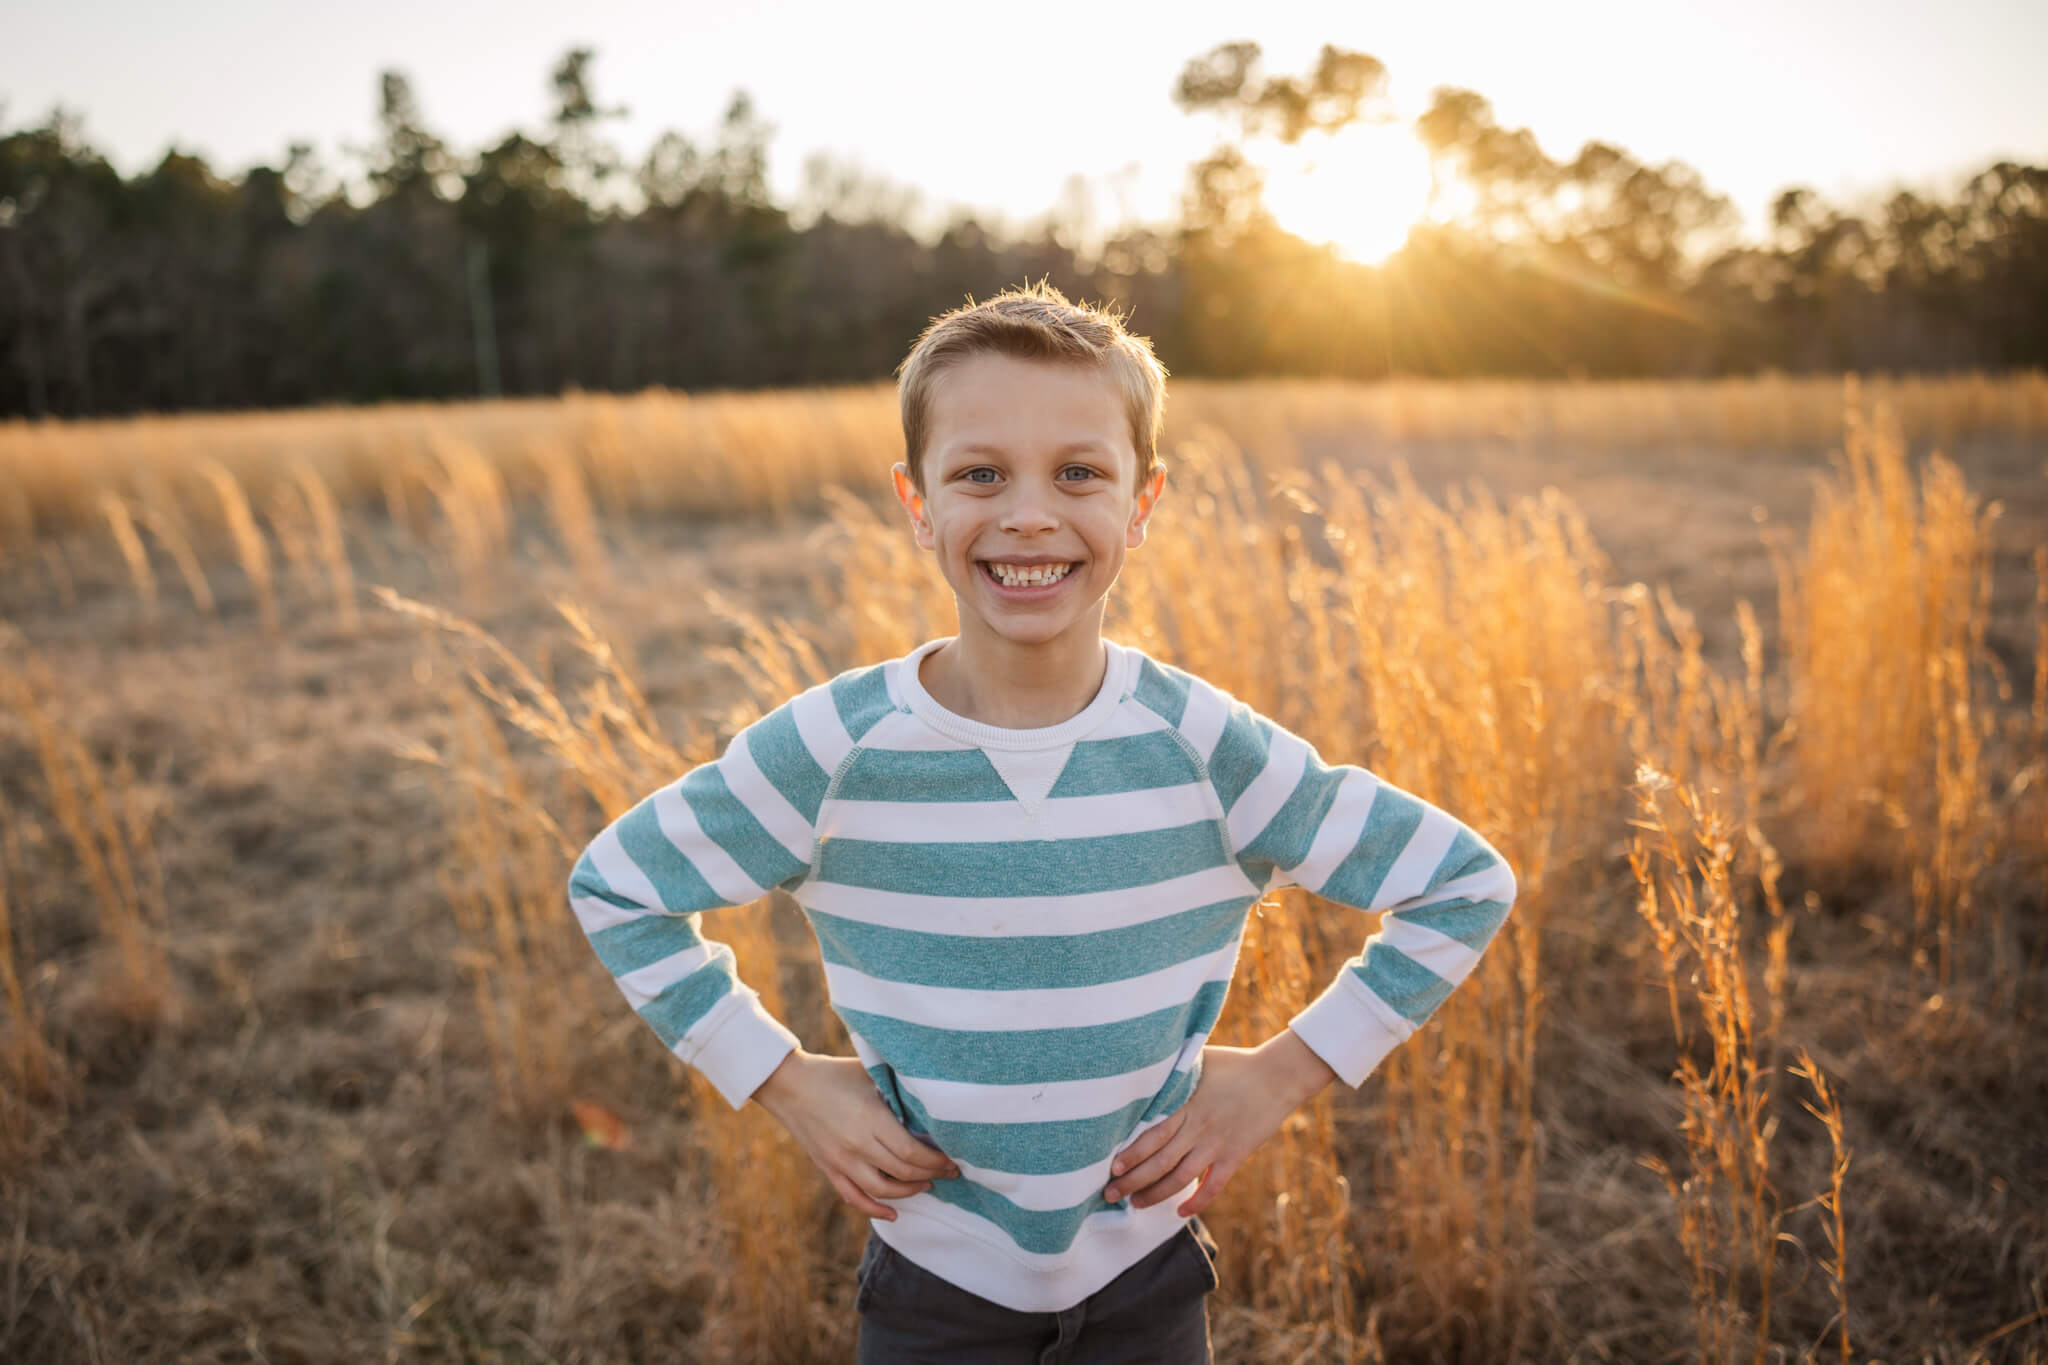 All smiles from this young man in his individual portrait during the family session.